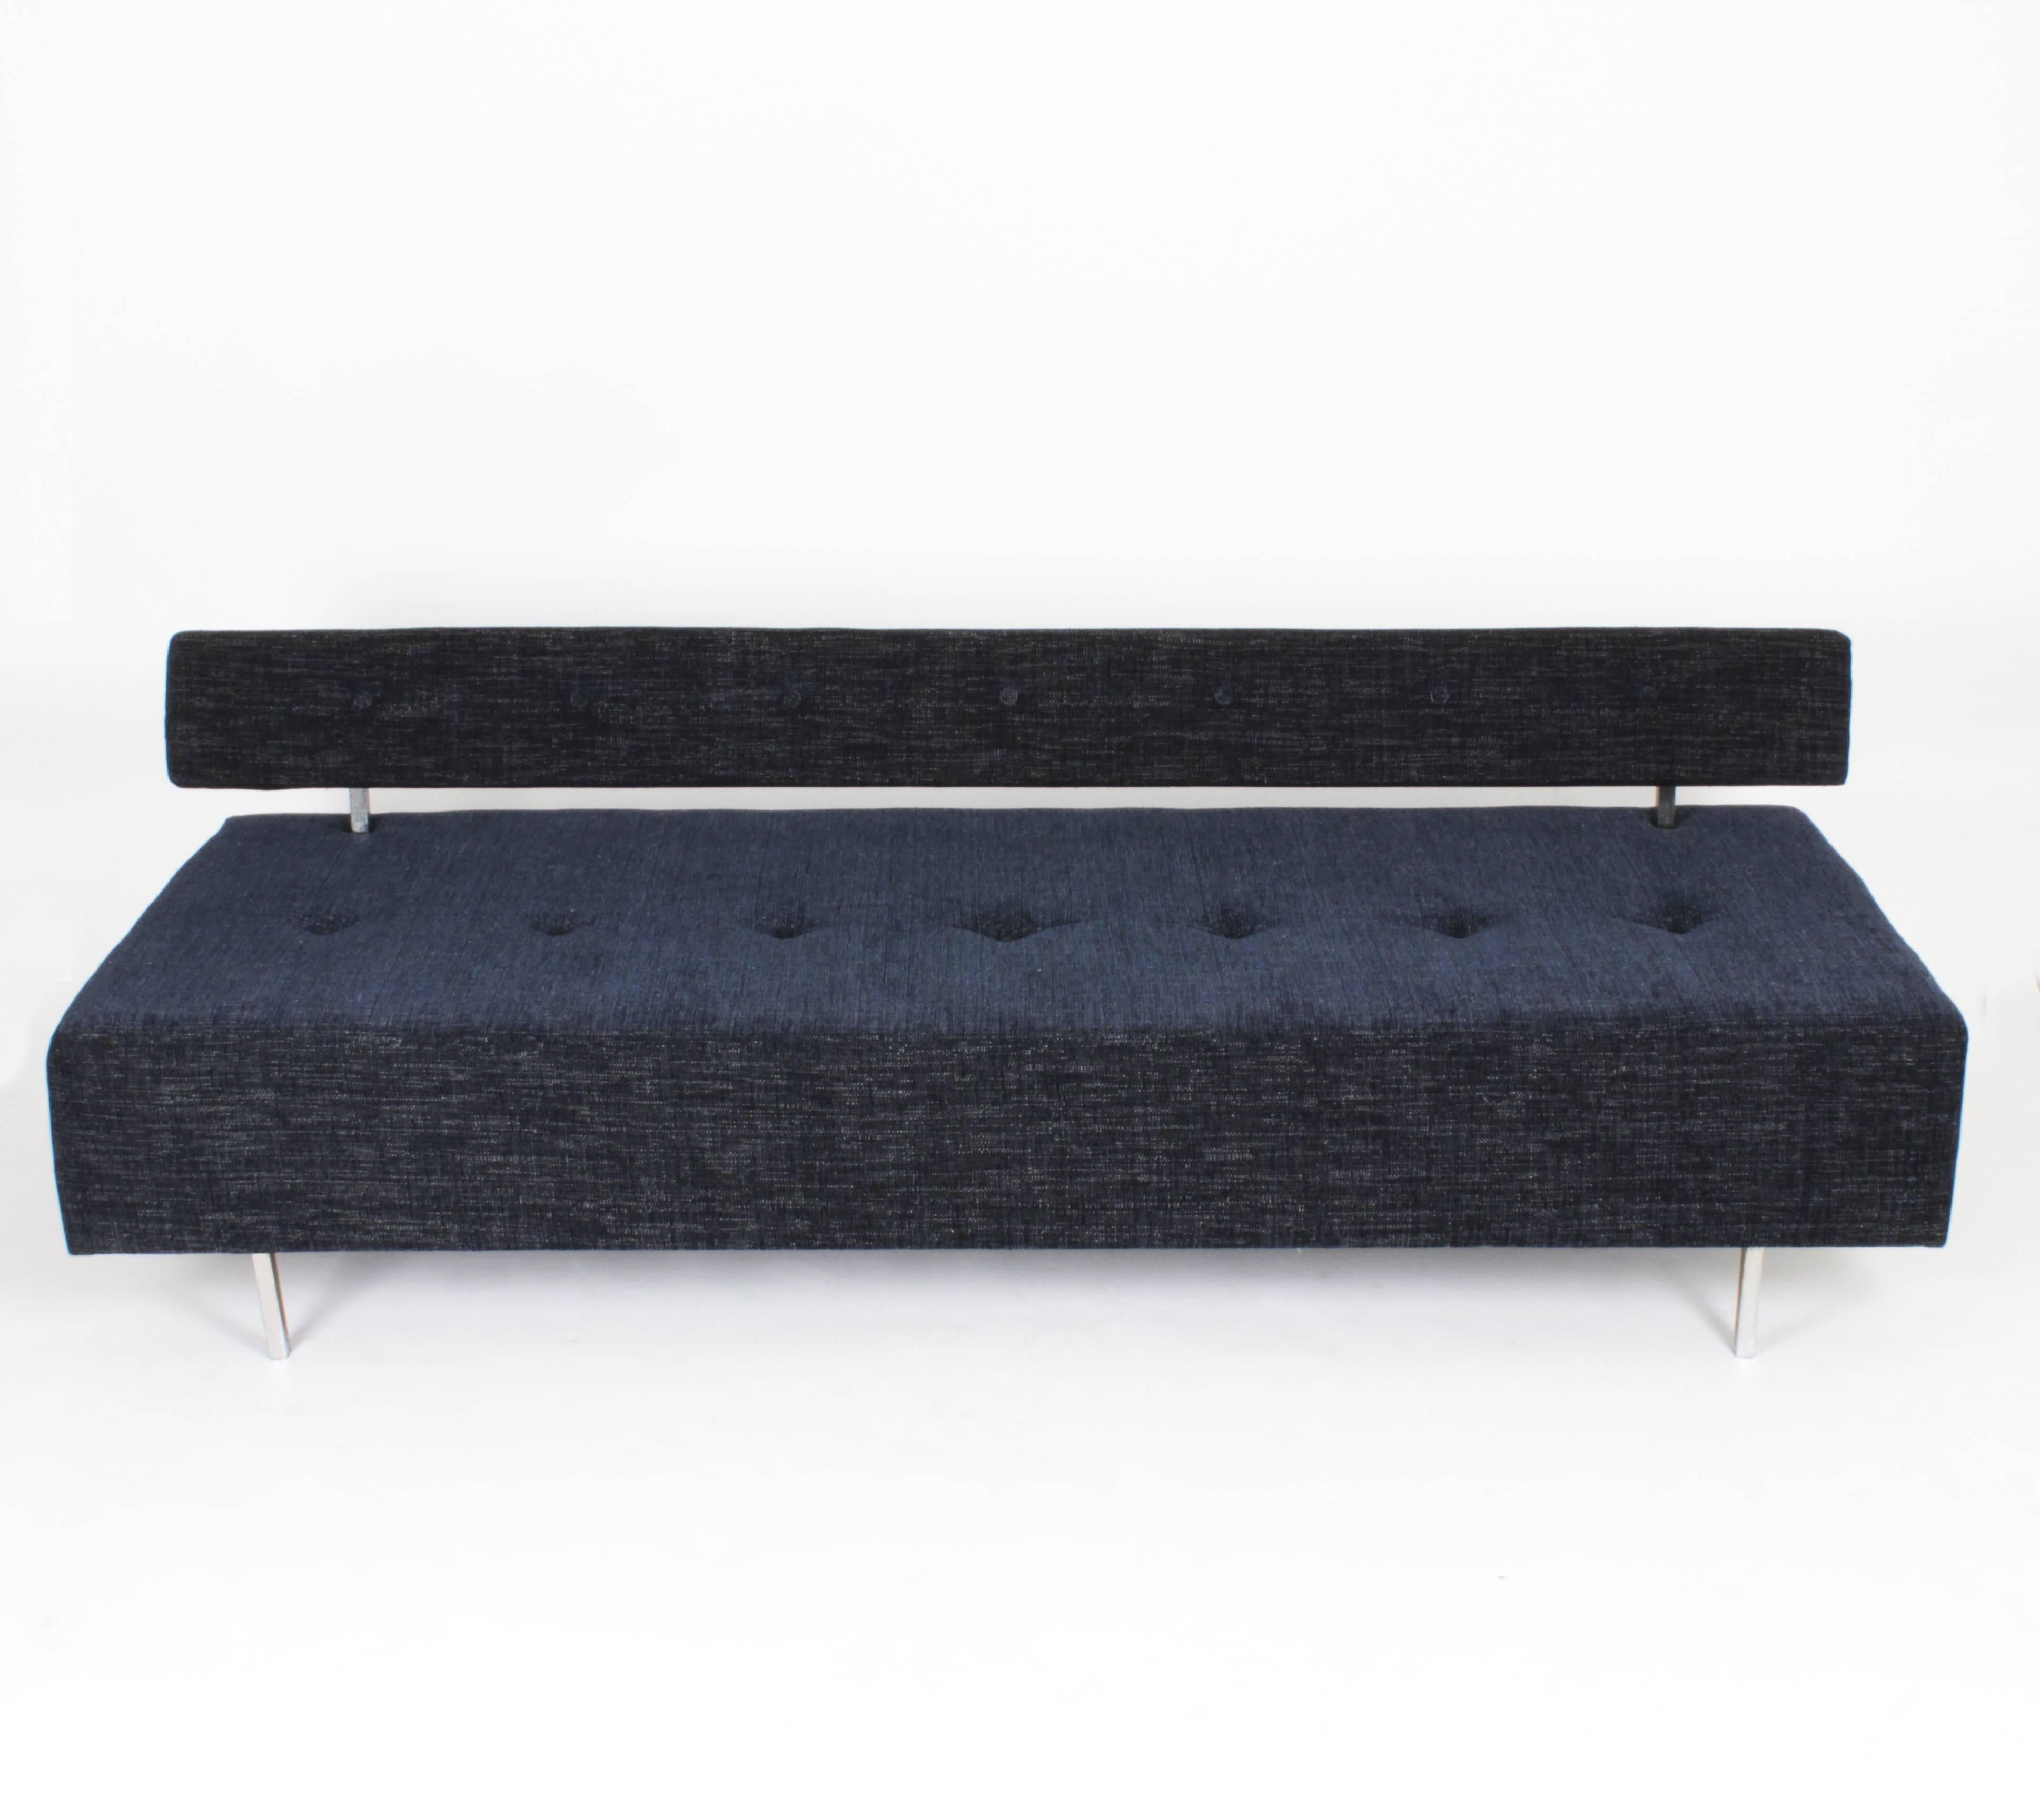 AR-1 sofa by Janine Abraham and Dirk Jan Rol, edited by Les Huchers Minvielle, France, circa 1959-1960.

Newly upholstered in blue fabric, chromed metal.